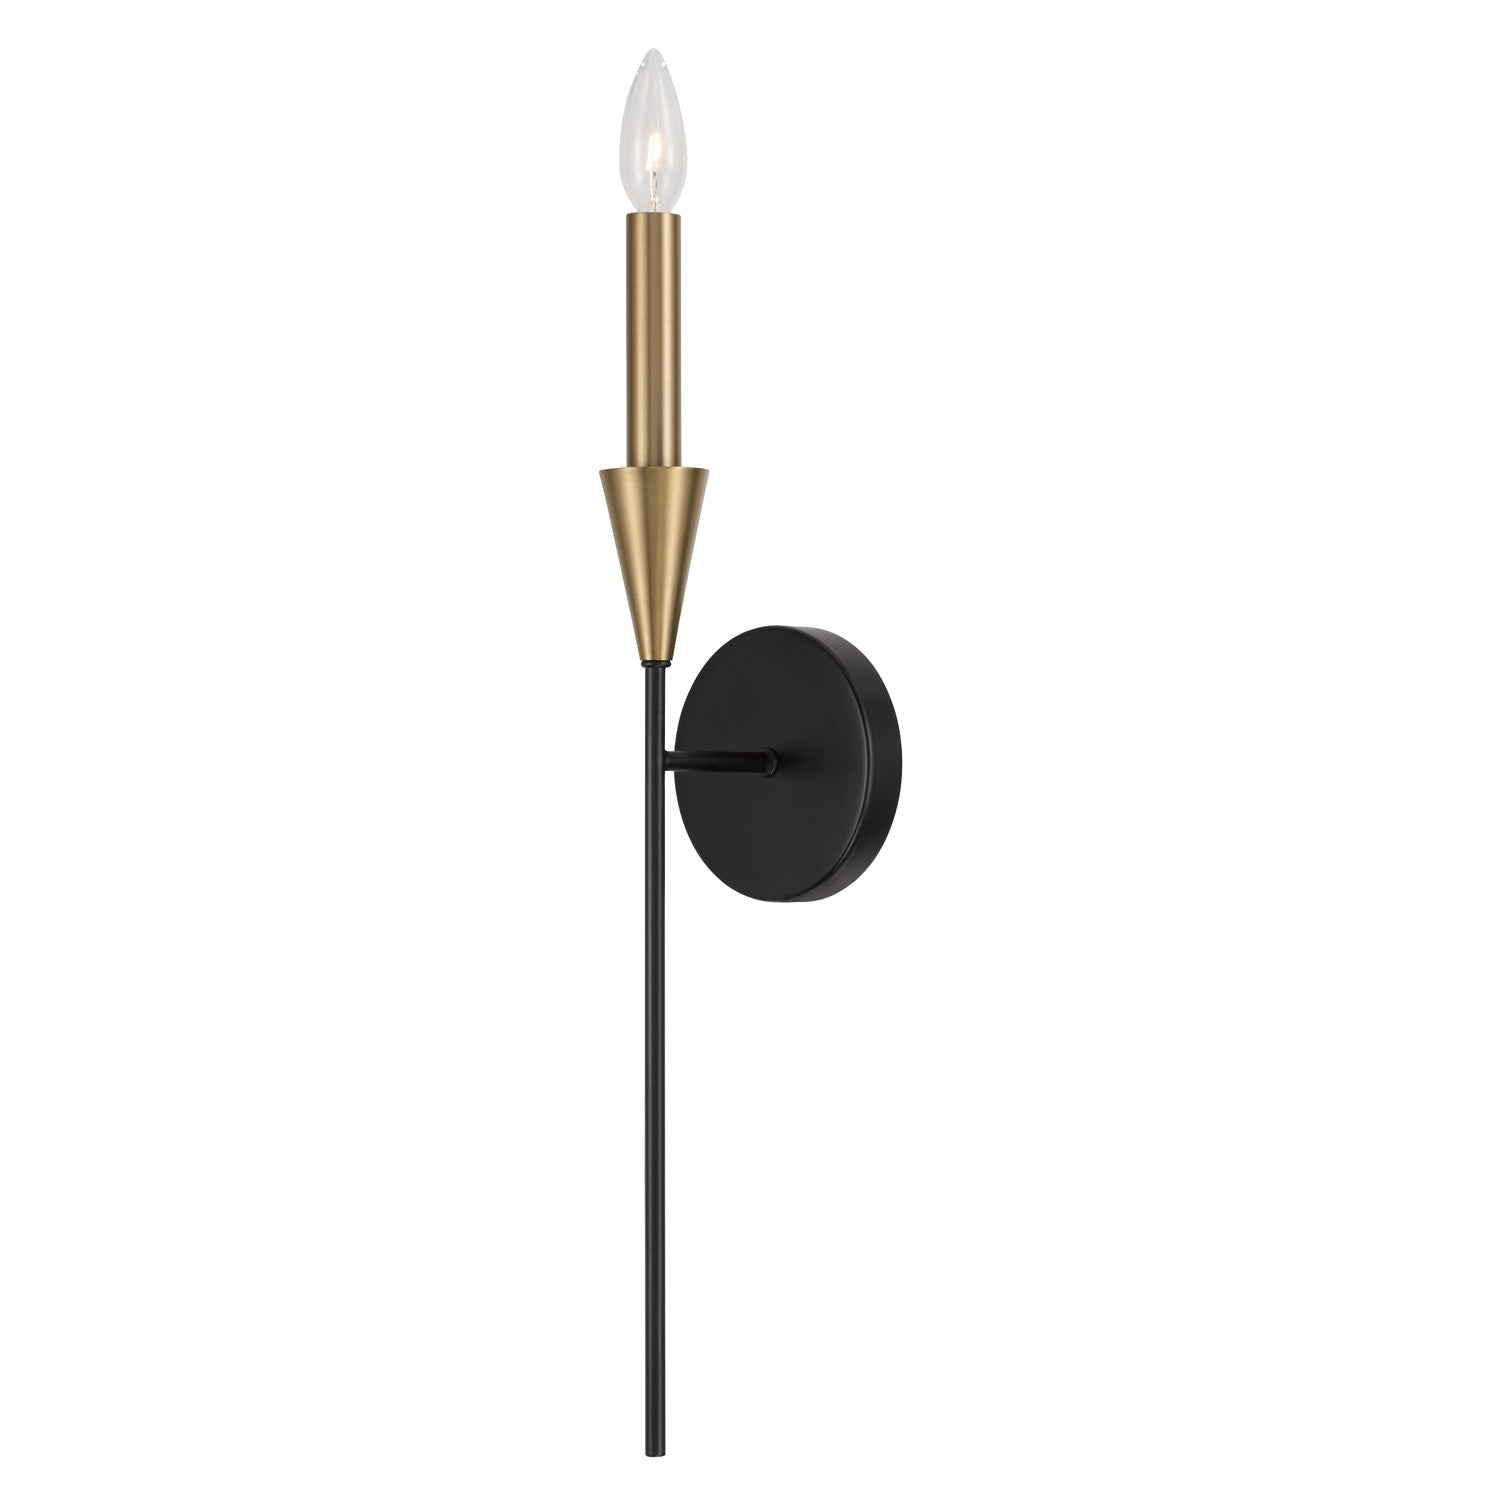 Capital Lighting - 651911AB - One Light Wall Sconce - Avant - Aged Brass and Black